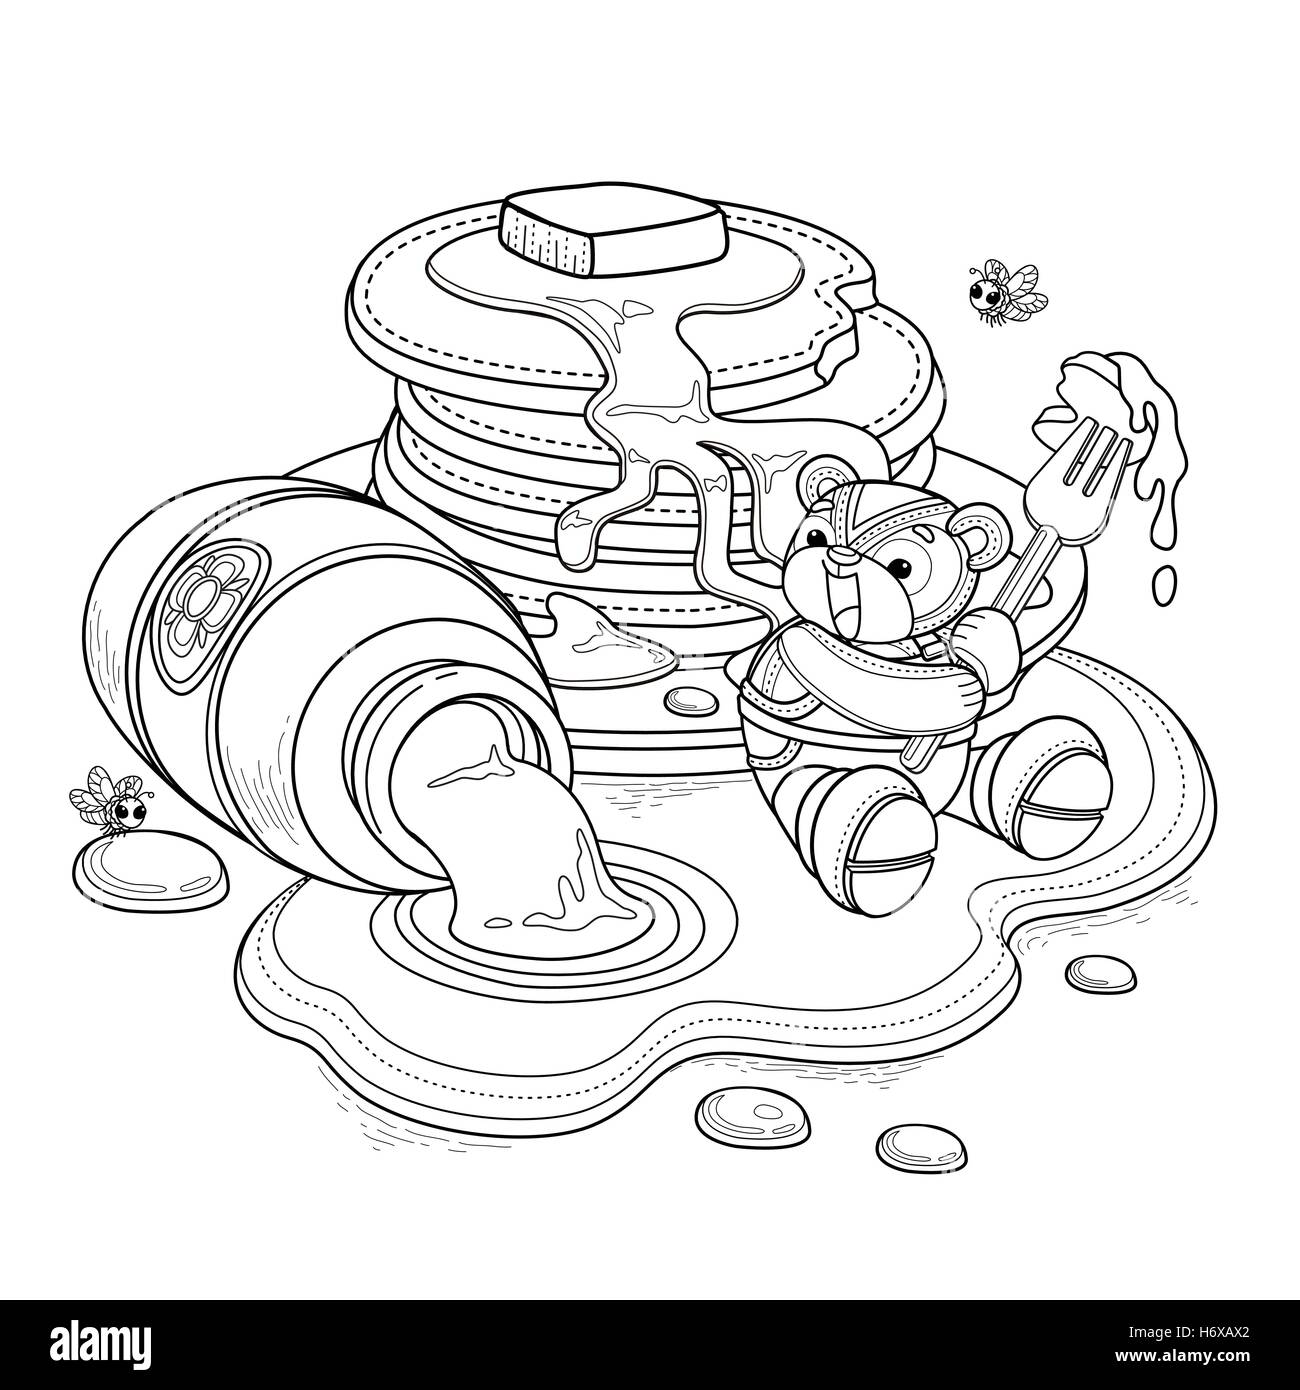 Lovely bear adult coloring page, little bear enjoying sweet honey pancake with fork. Honey drill from glass jar. Stock Vector